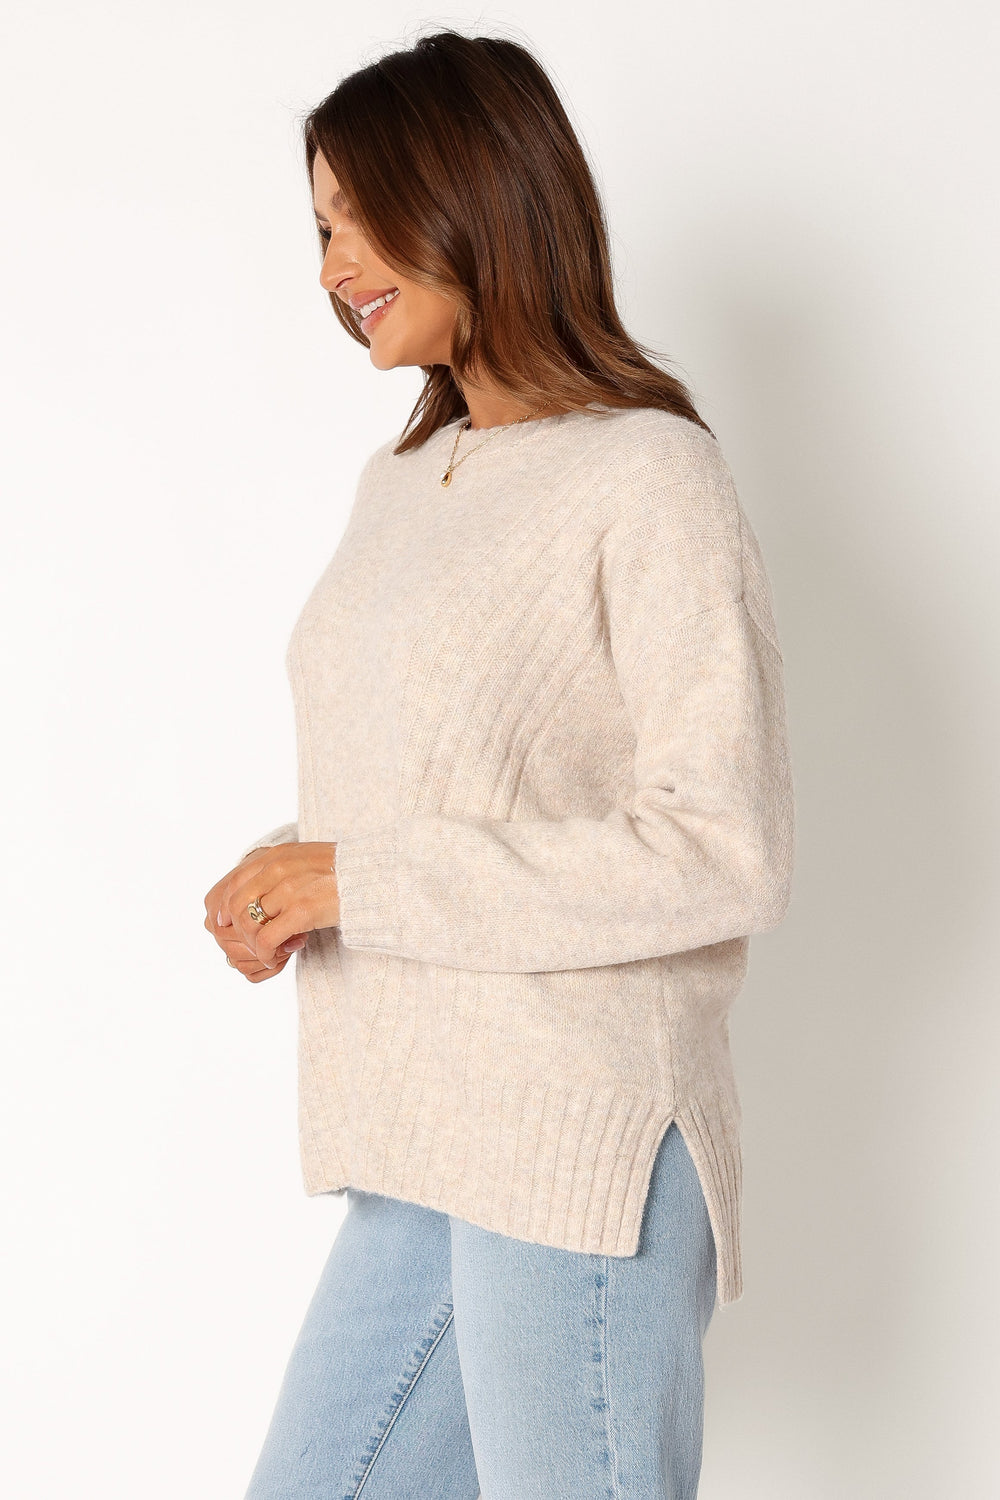 Petal and Pup USA KNITWEAR Meilani Textured Knit Sweater - Oatmeal